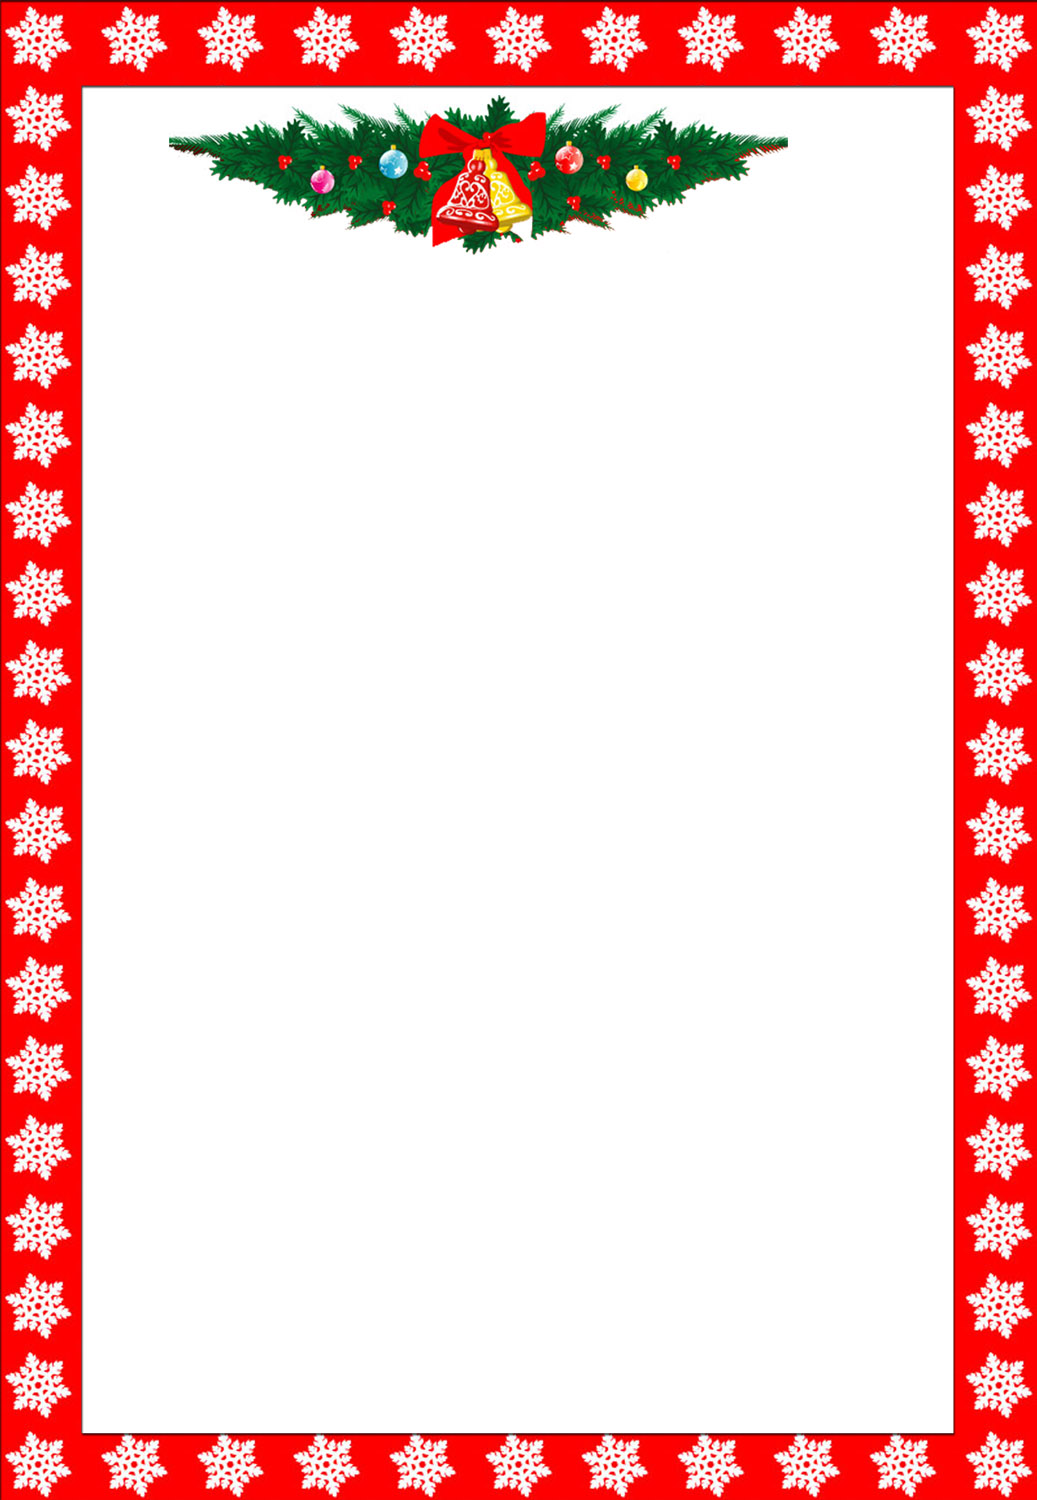 Free Christmas Clipart Borders Frames Home Travels Worlds Image